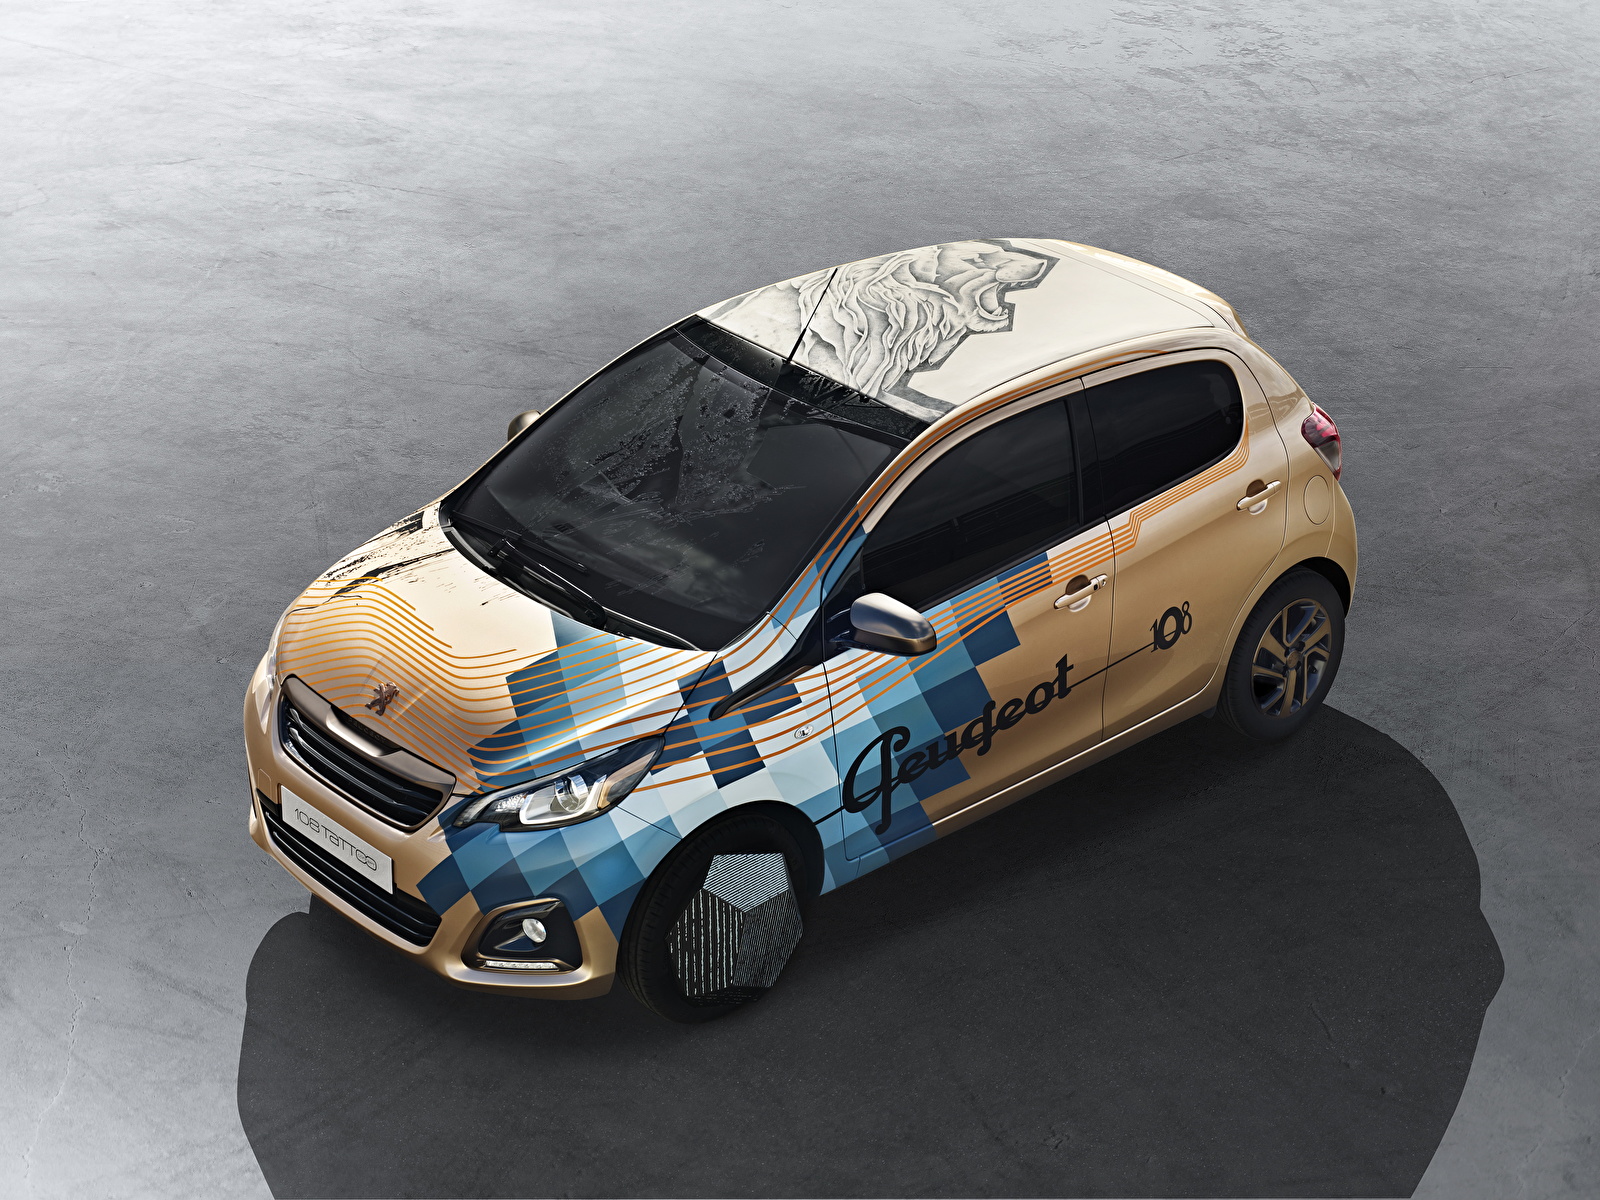 1600x1200 Peugeot Tuning 2014 108 Tattoo voiture, automobile Voitures